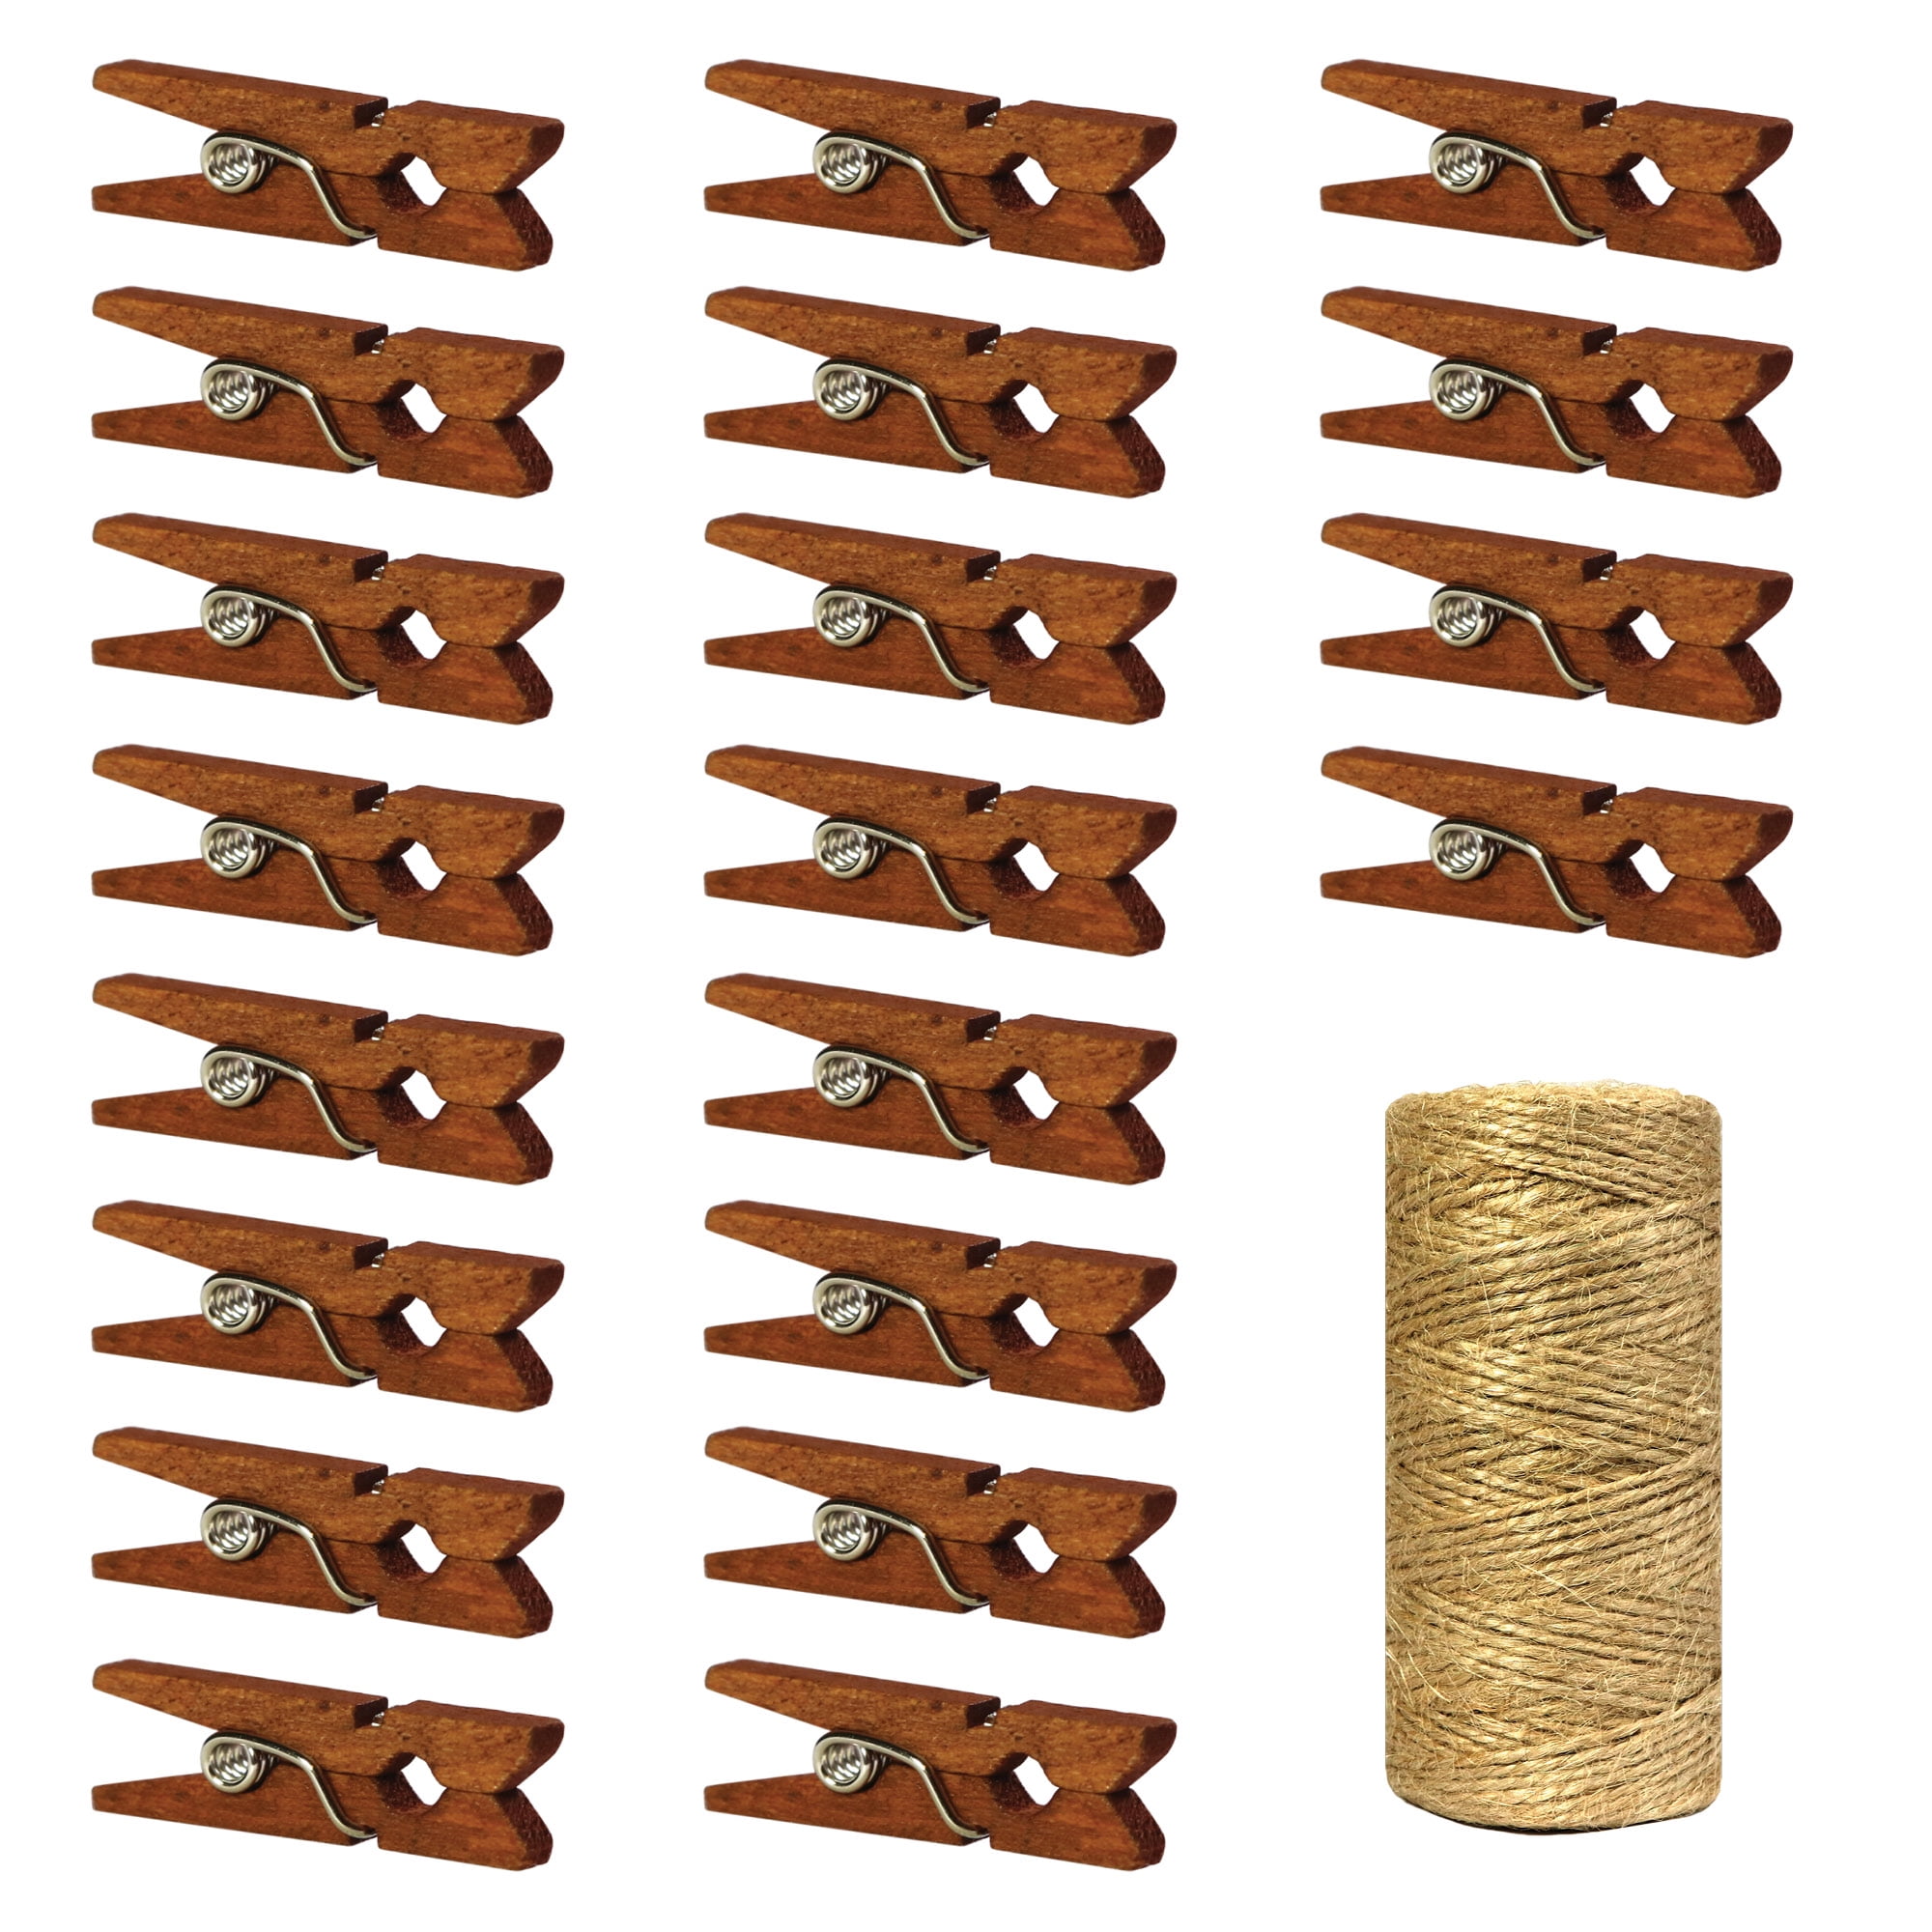  Mini Clothes Pins for Photo, Natural Small Wooden Clothespins 1  Inch Tiny Wood Decorative Clips Bulk, 33FT Jute Twine and Clothespins for  Crafts Photos Pictures Baby Shower Game Classroom, 250 PCS 